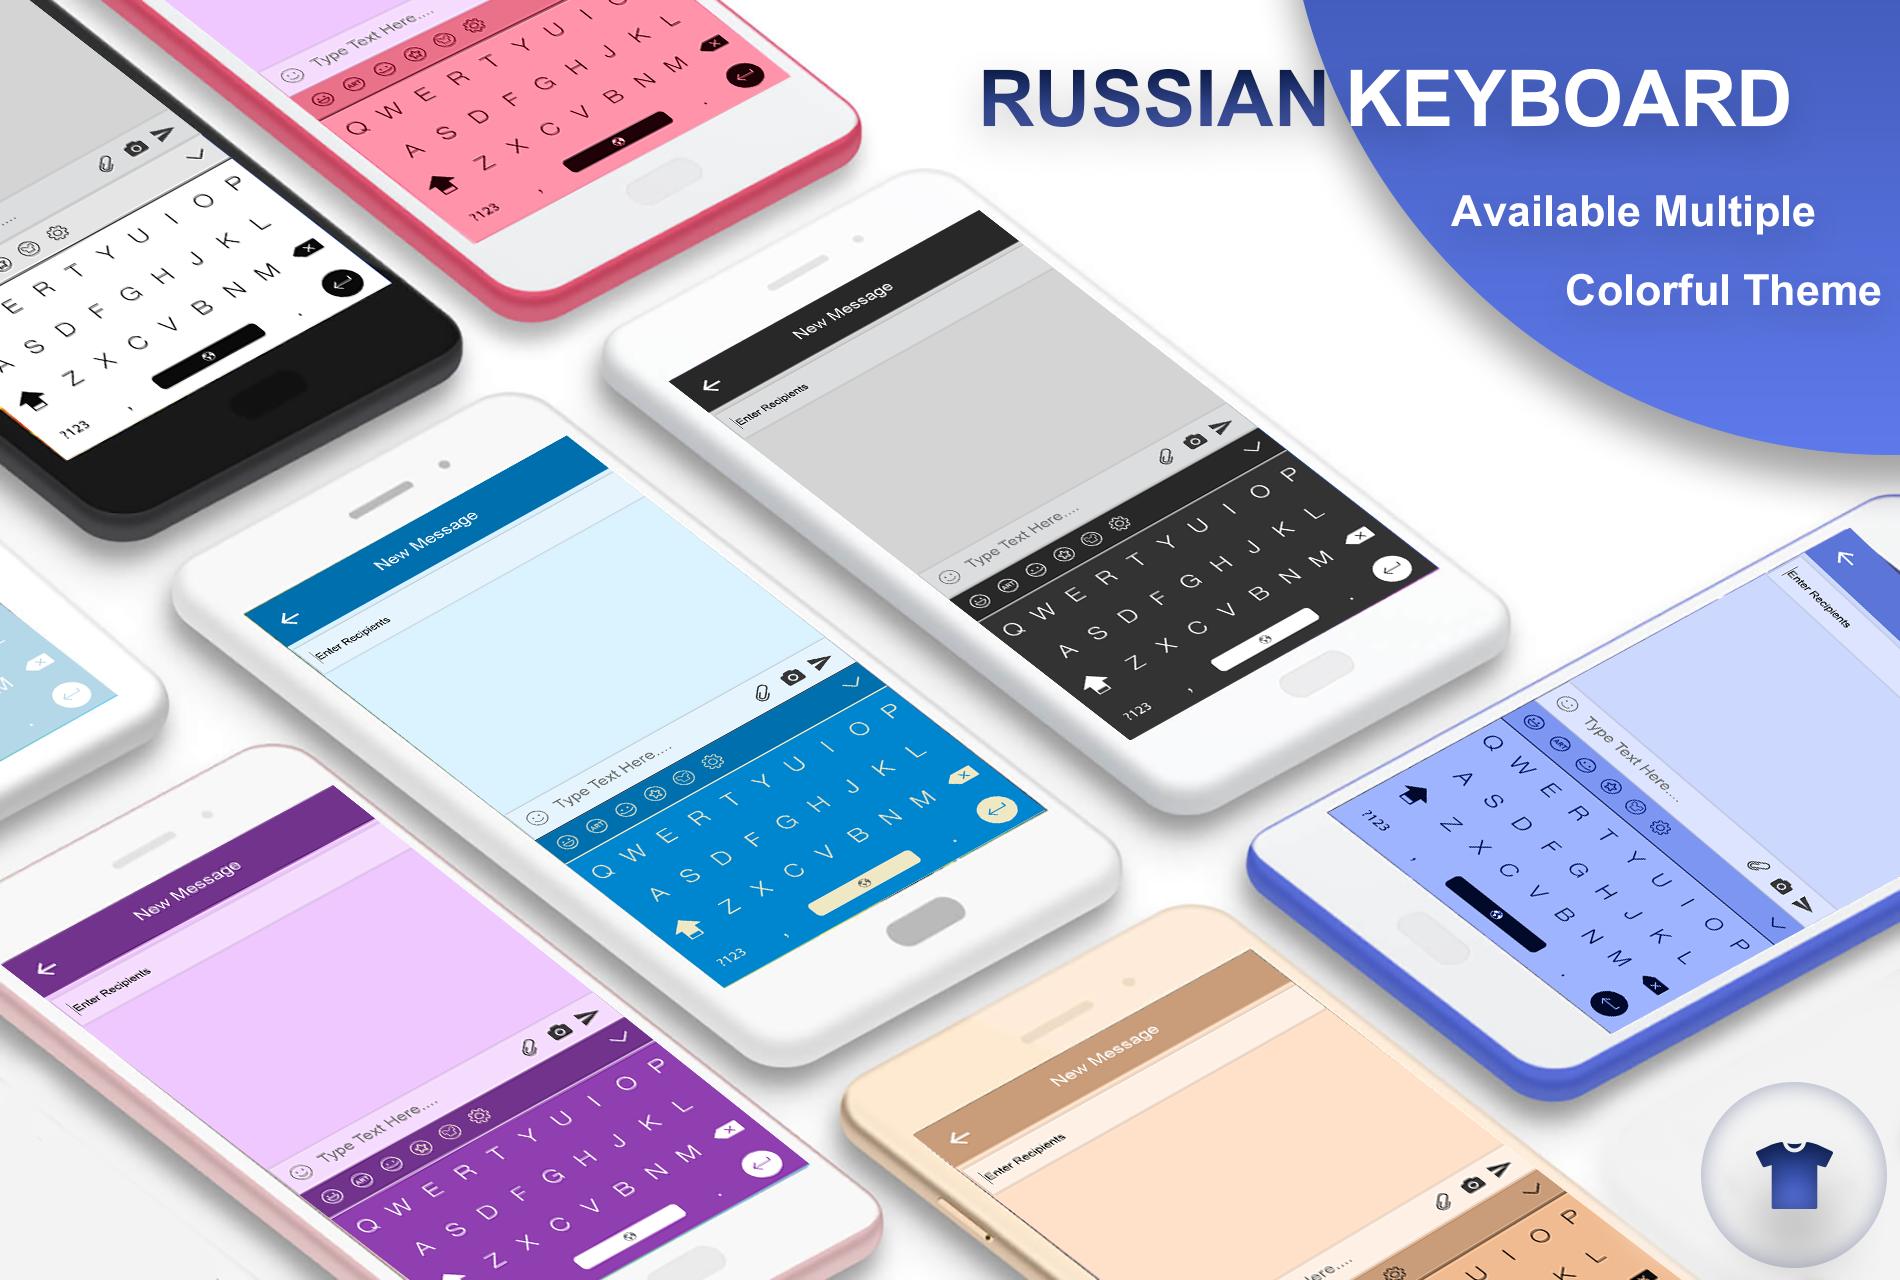 Russian Keyboard - English to Russian Keyboard for Android - APK ...